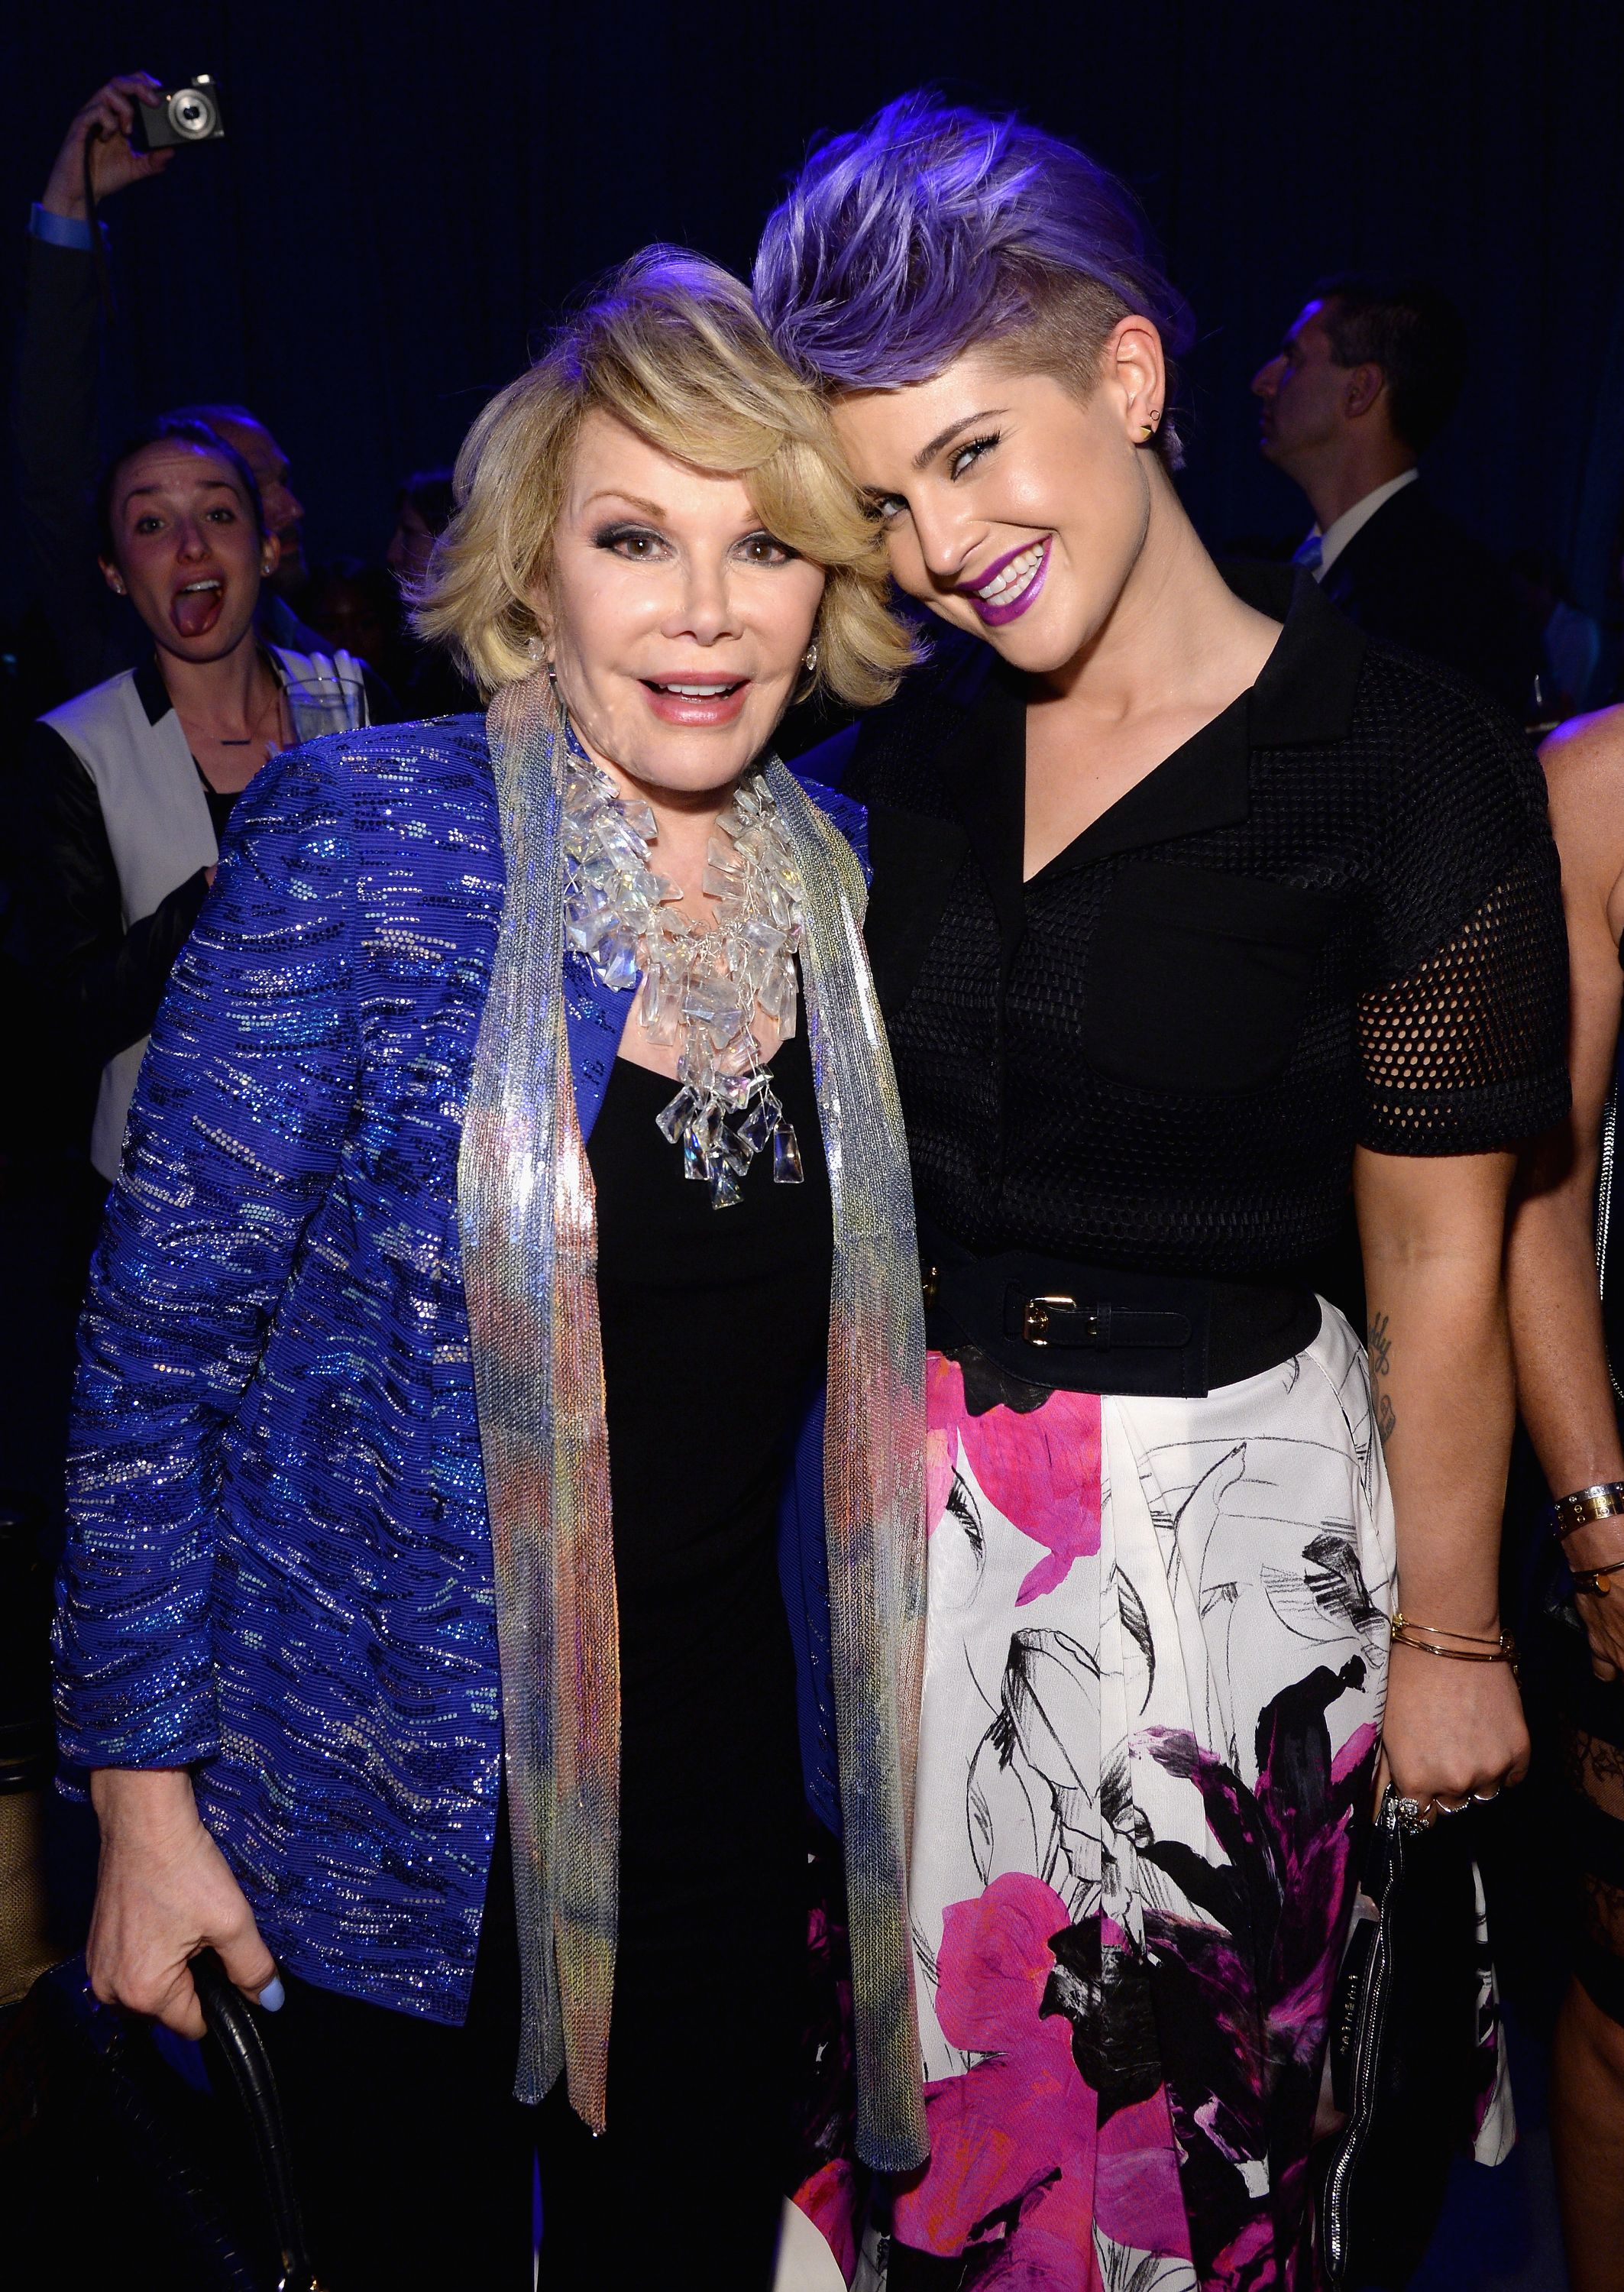 Joan Rivers and Kelly Osbourne from the "Fashion Police" in New York City on May 15, 2014 | Photo: Larry Busacca/USA Network/NBCU Photo Bank/NBCUniversal/Getty Images